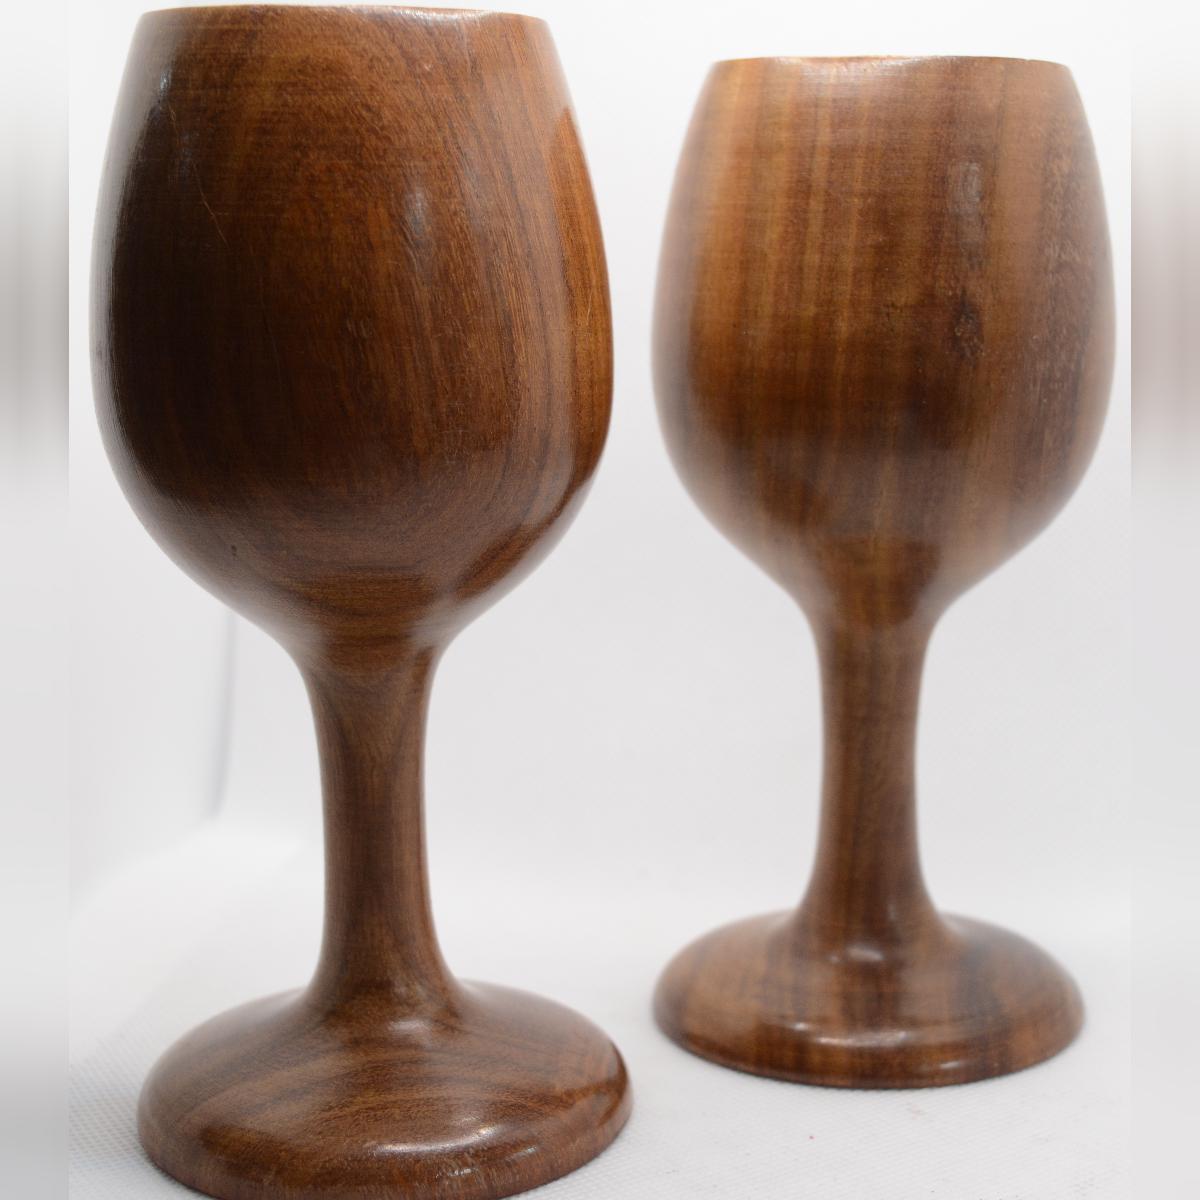 Channapatna Wooden Wine Glass